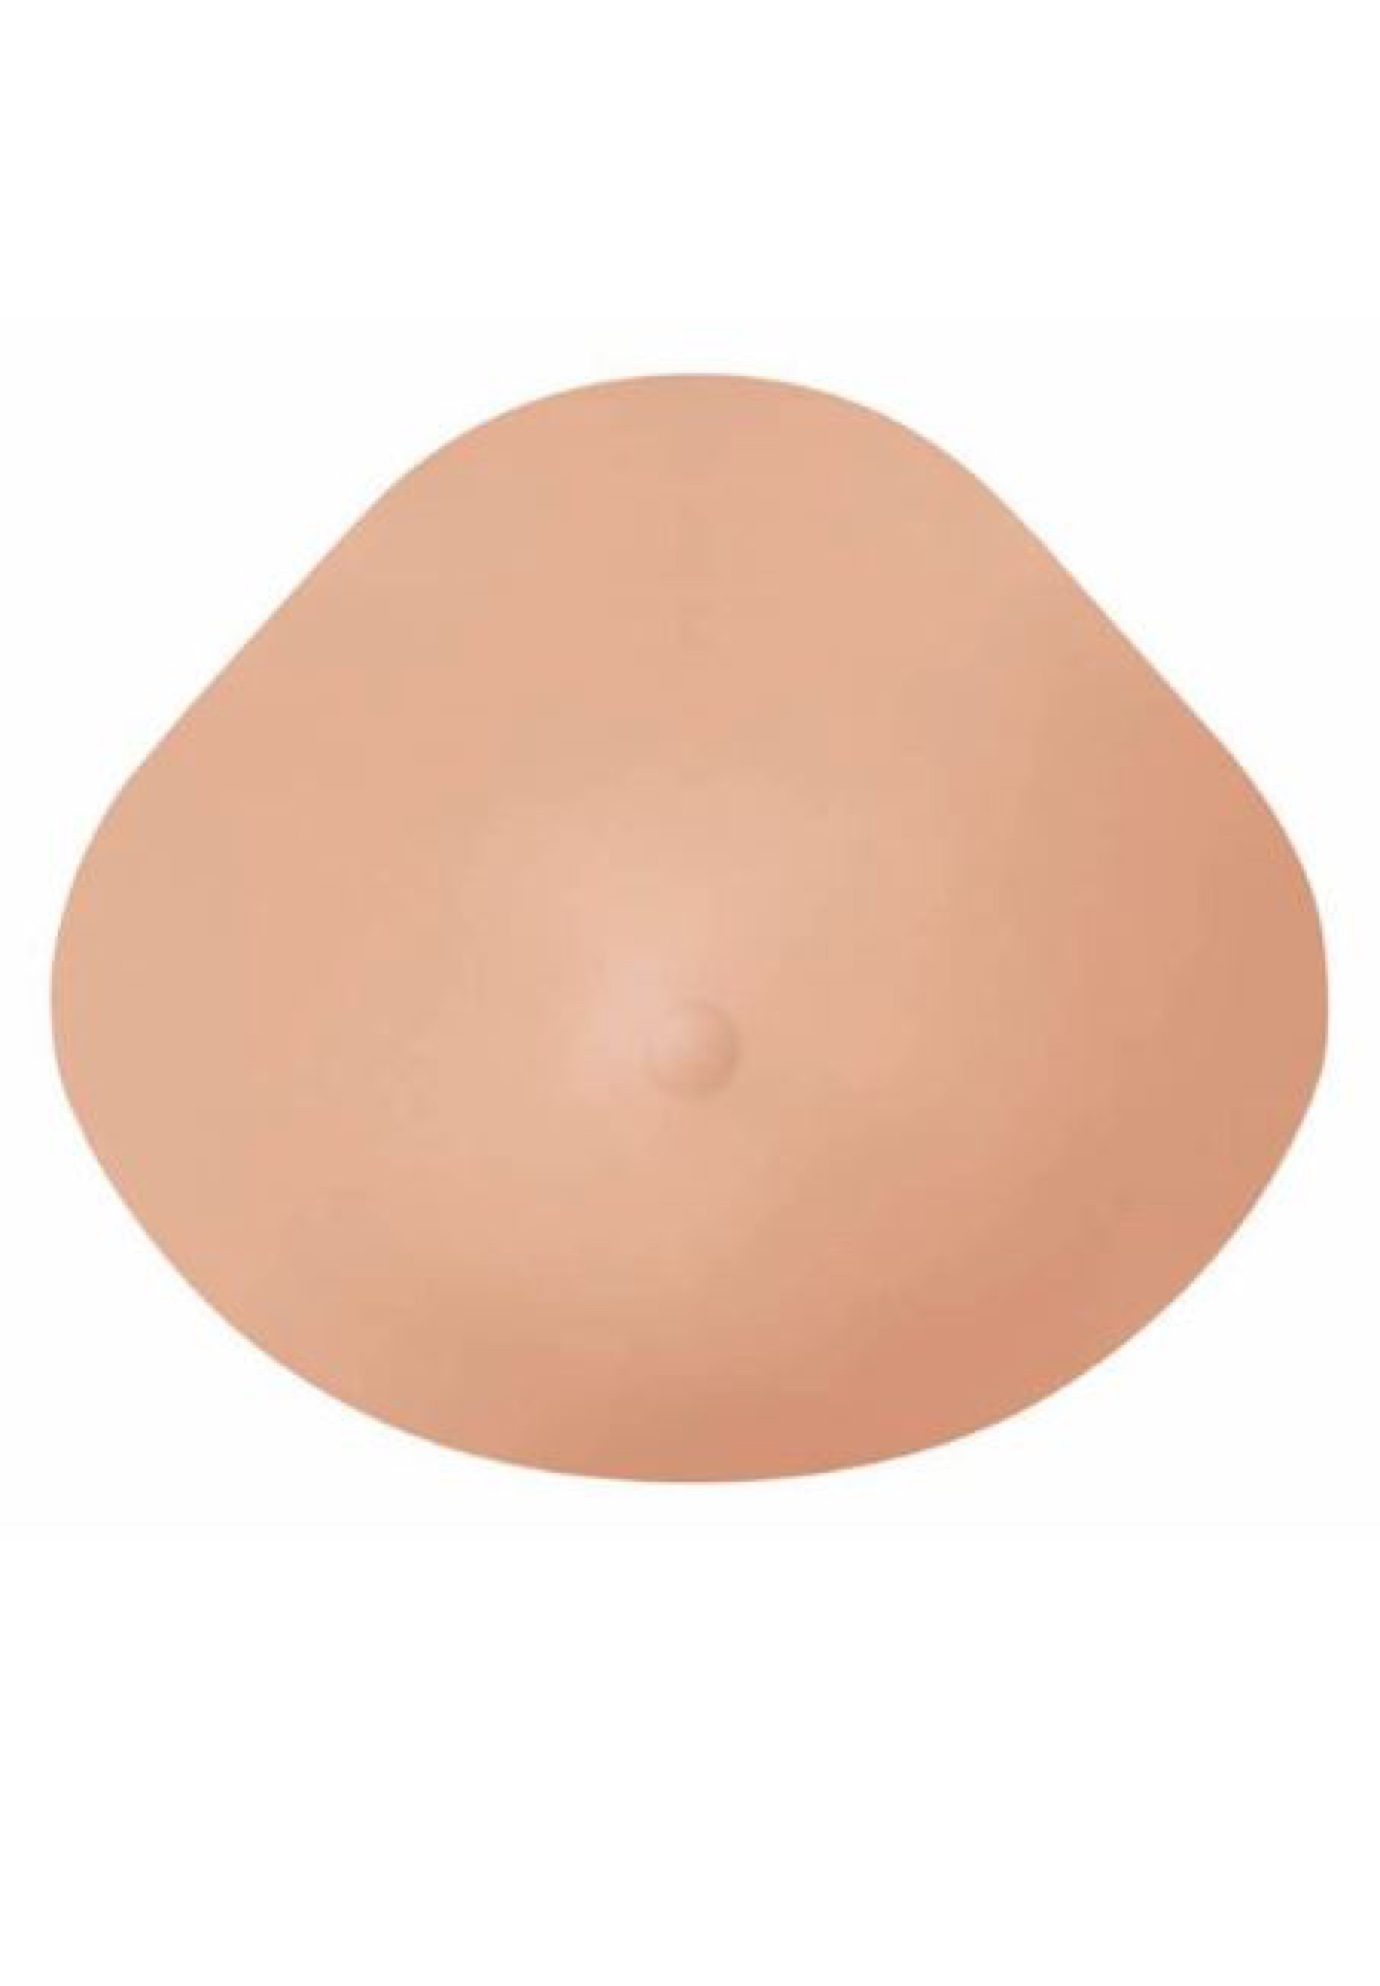 How To Make Silicone Breast Forms